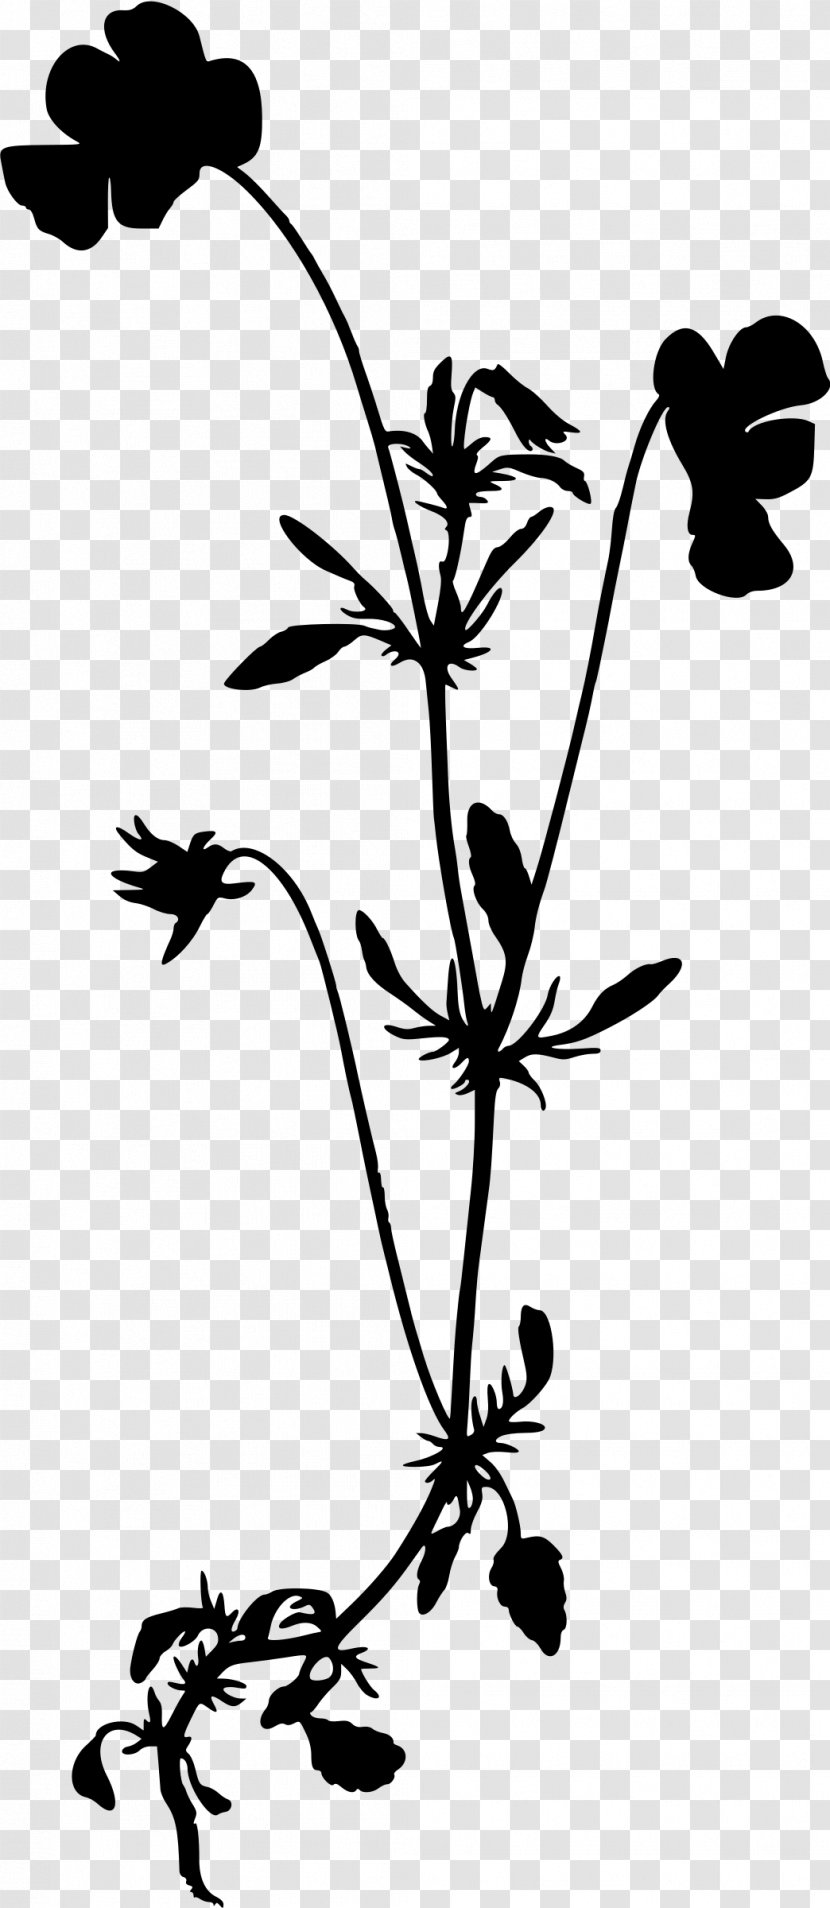 Wildflower Drawing Silhouette Clip Art - Twig - Wild Flowers Transparent PNG